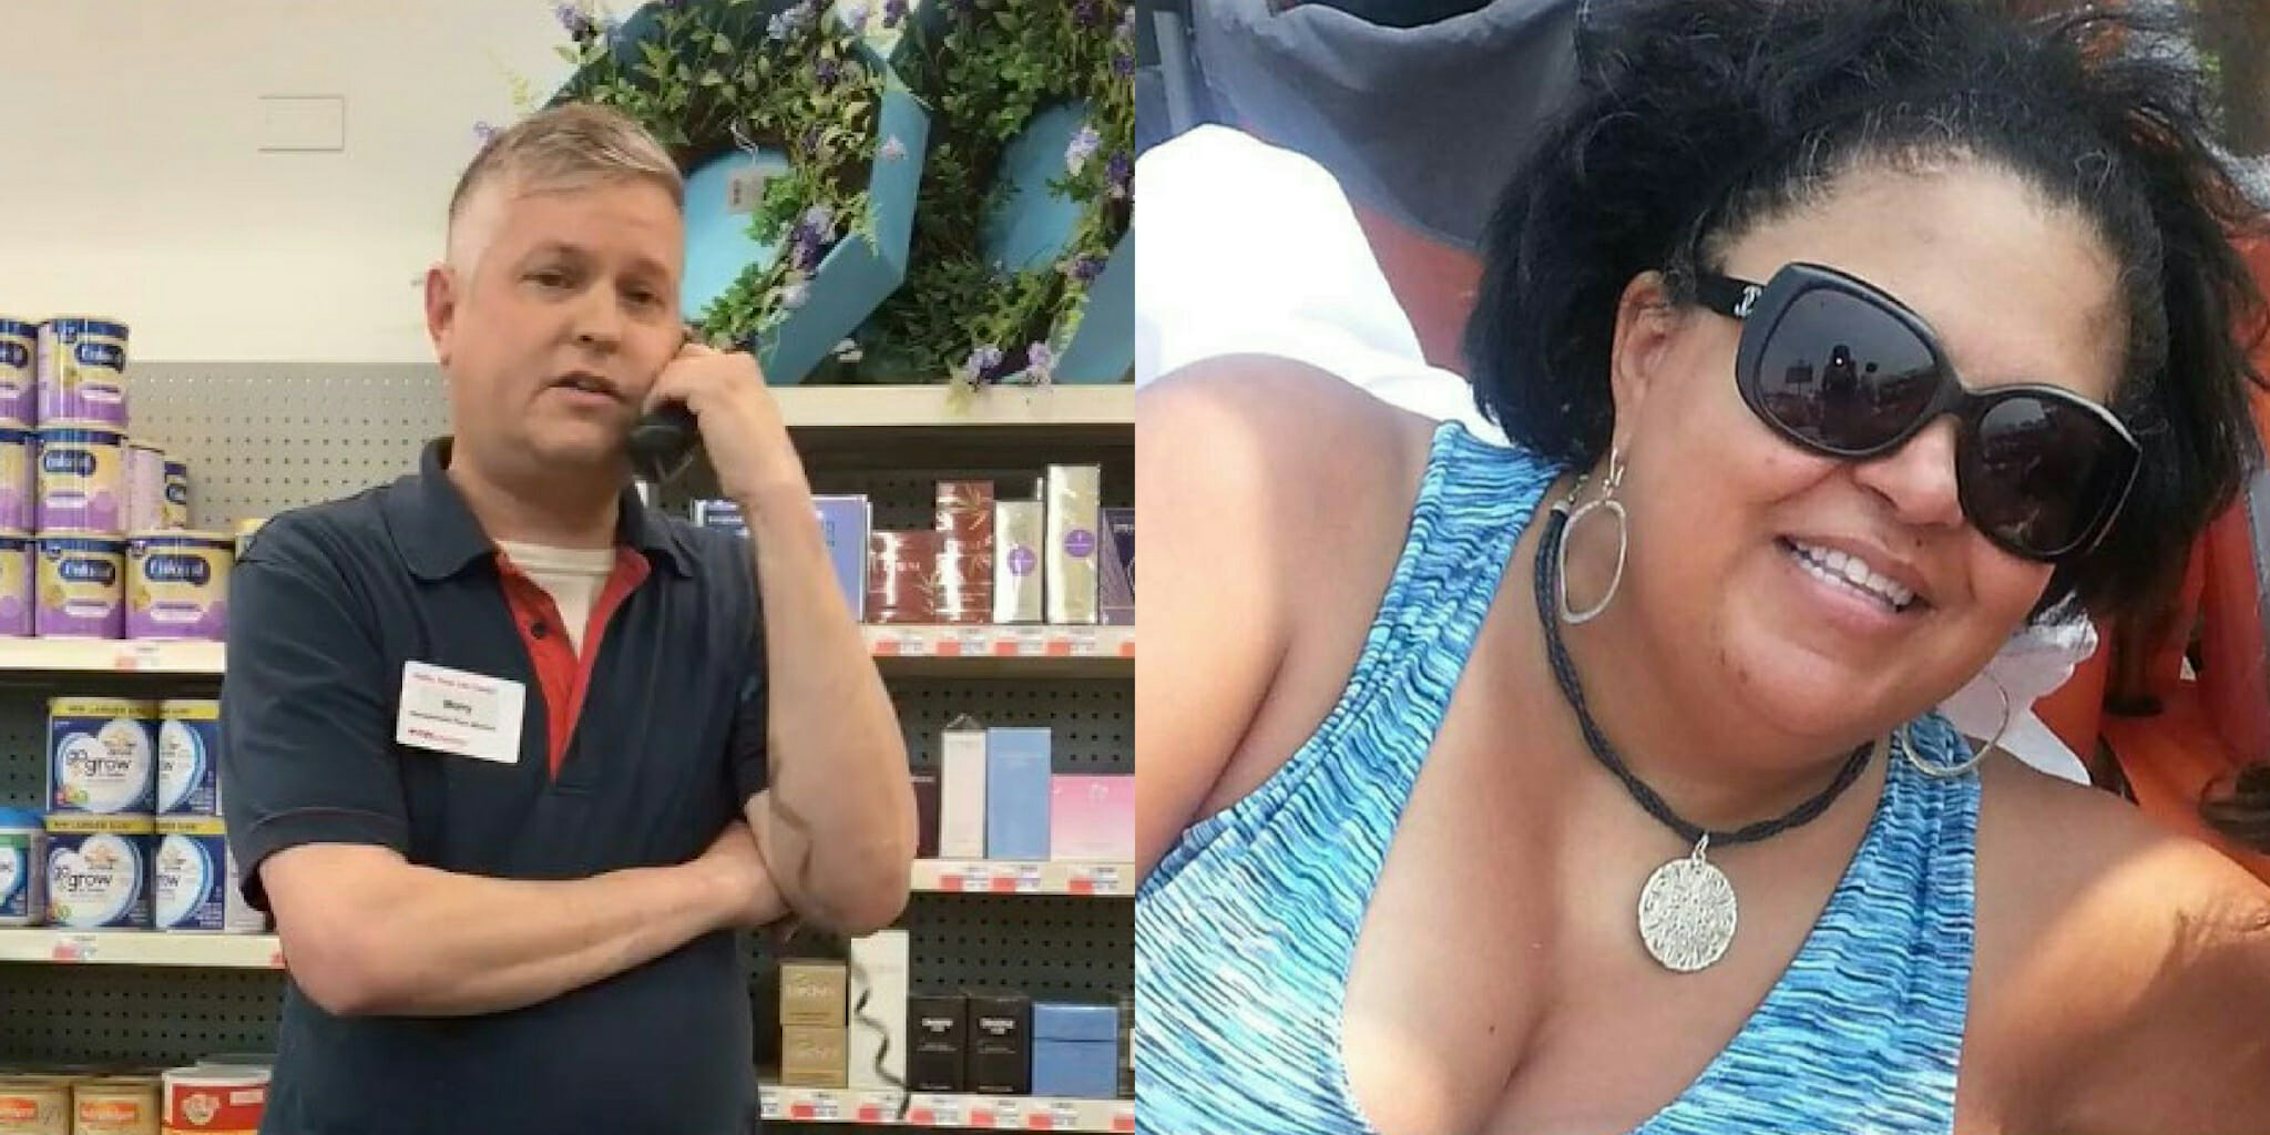 CVS manager calls police on Black customer over coupon.